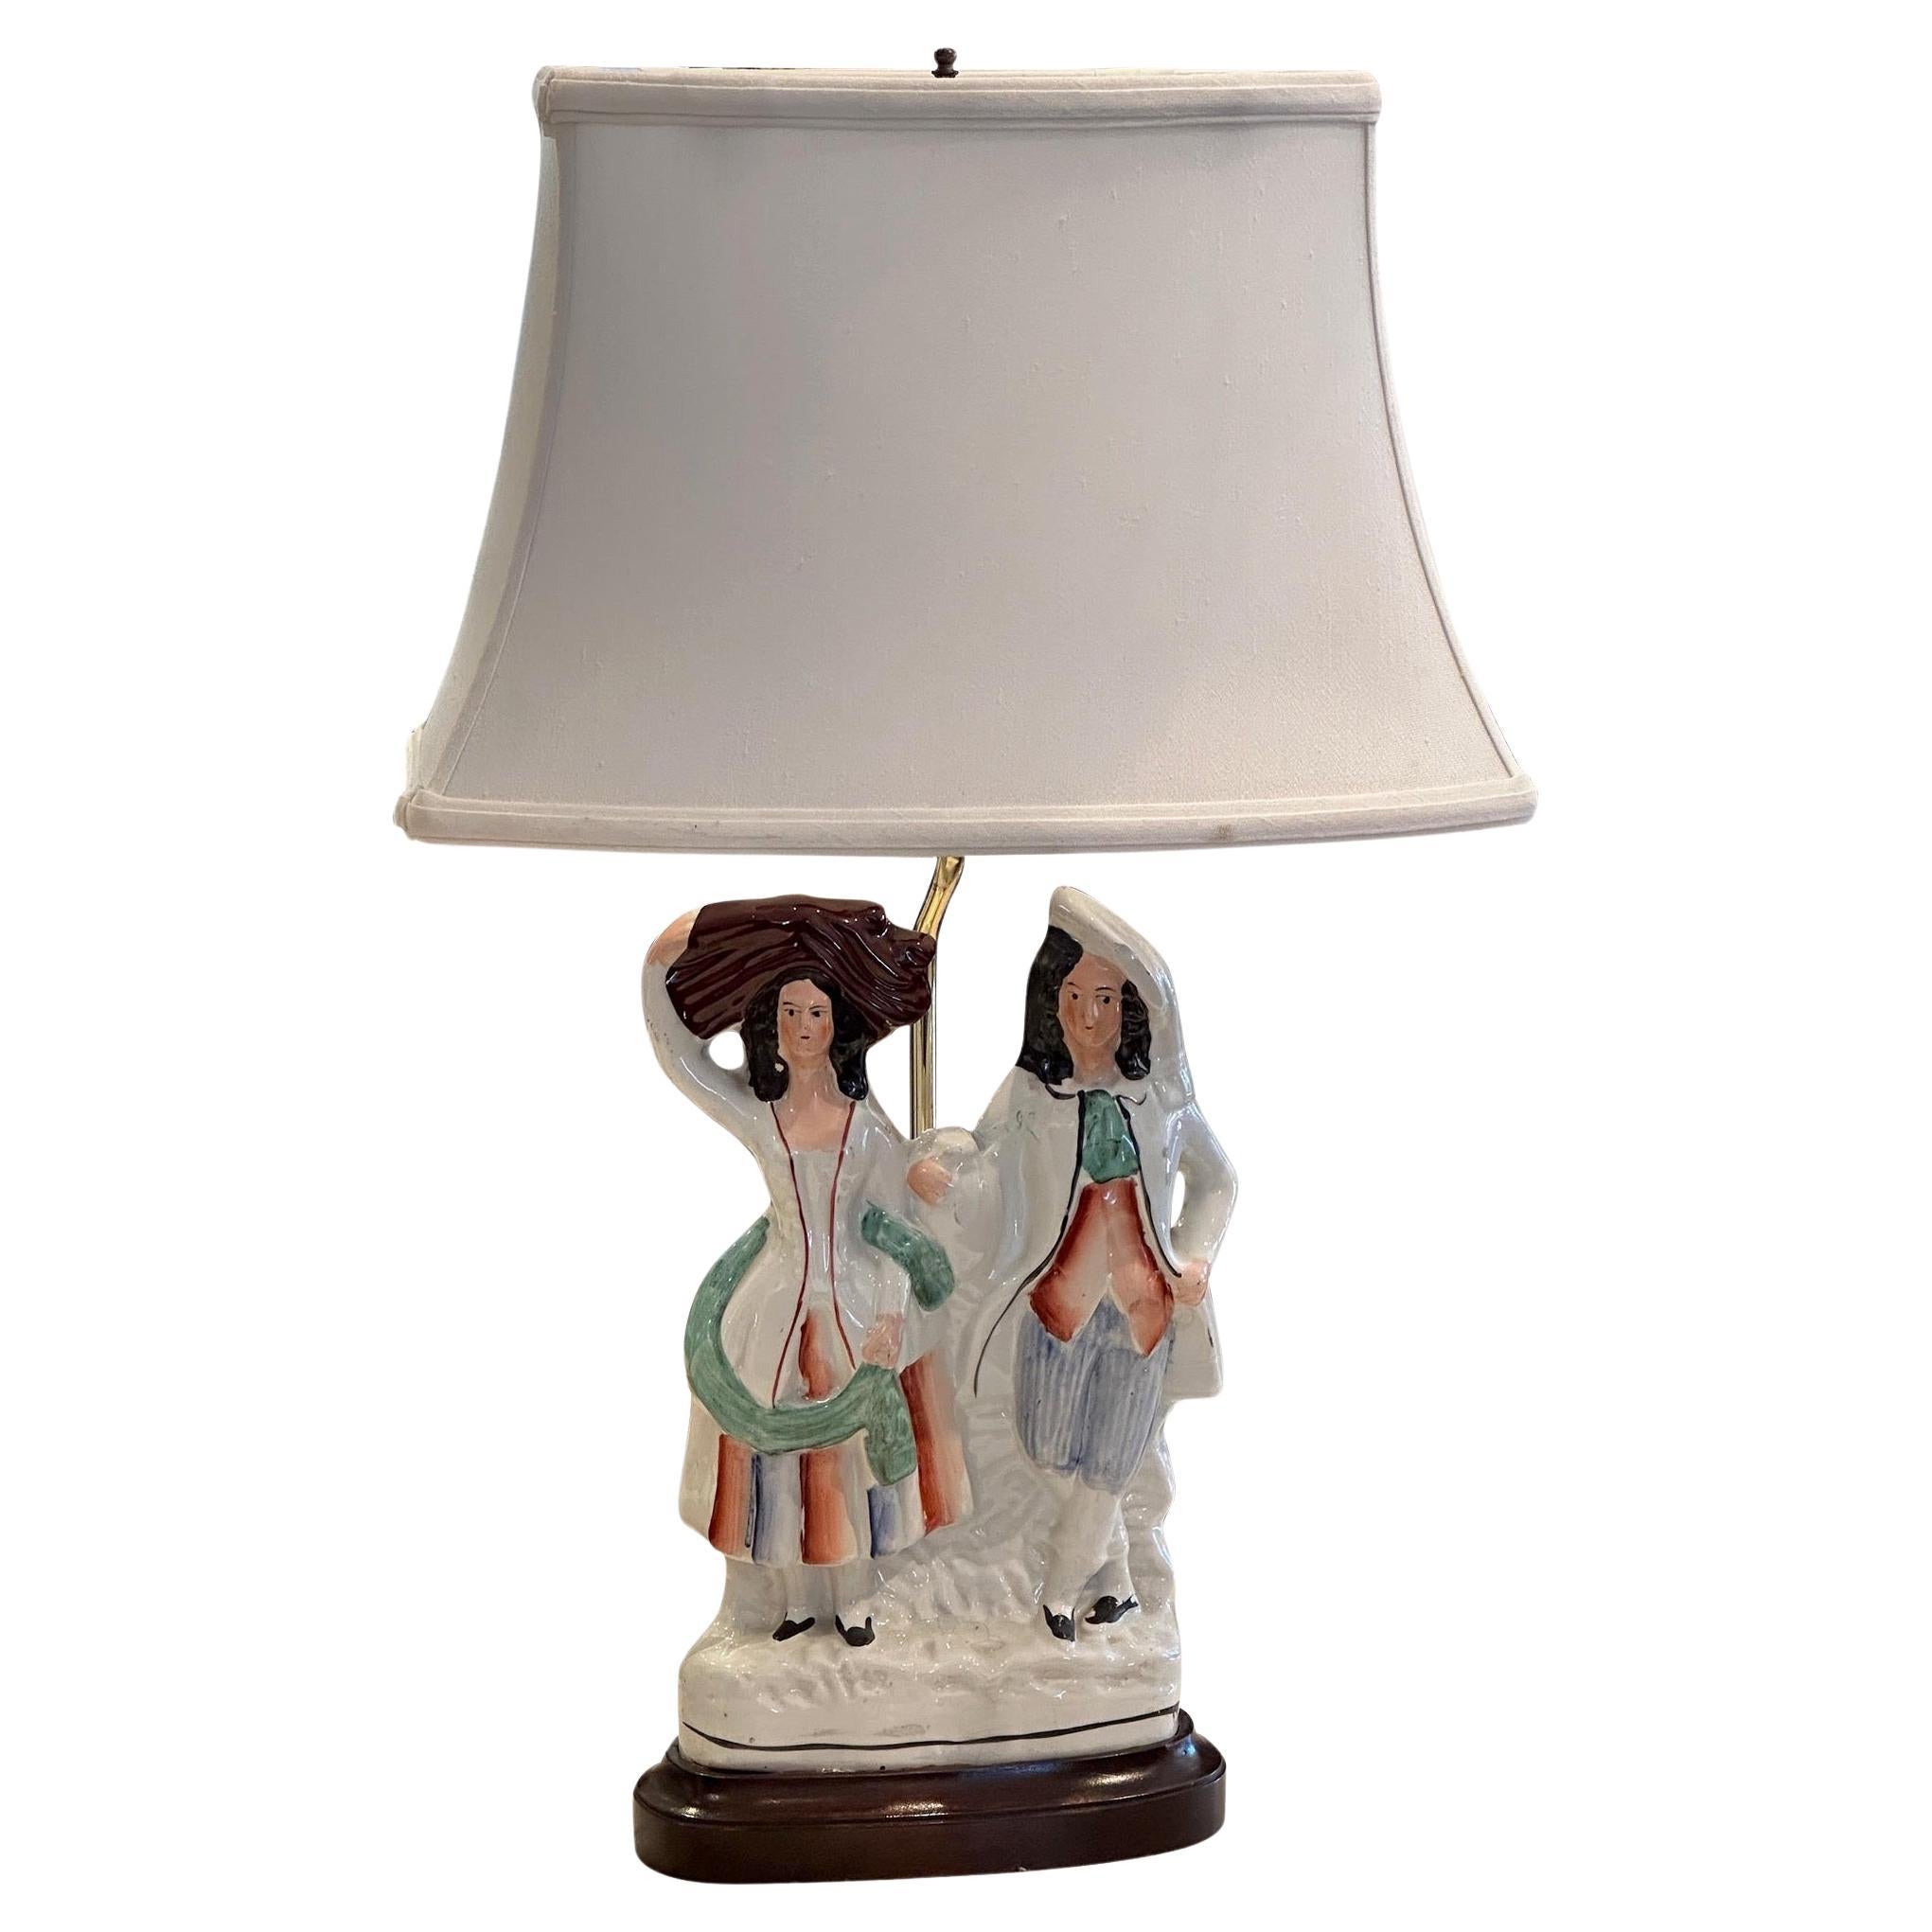 19th Century Staffordshire Mounted as Lamp For Sale